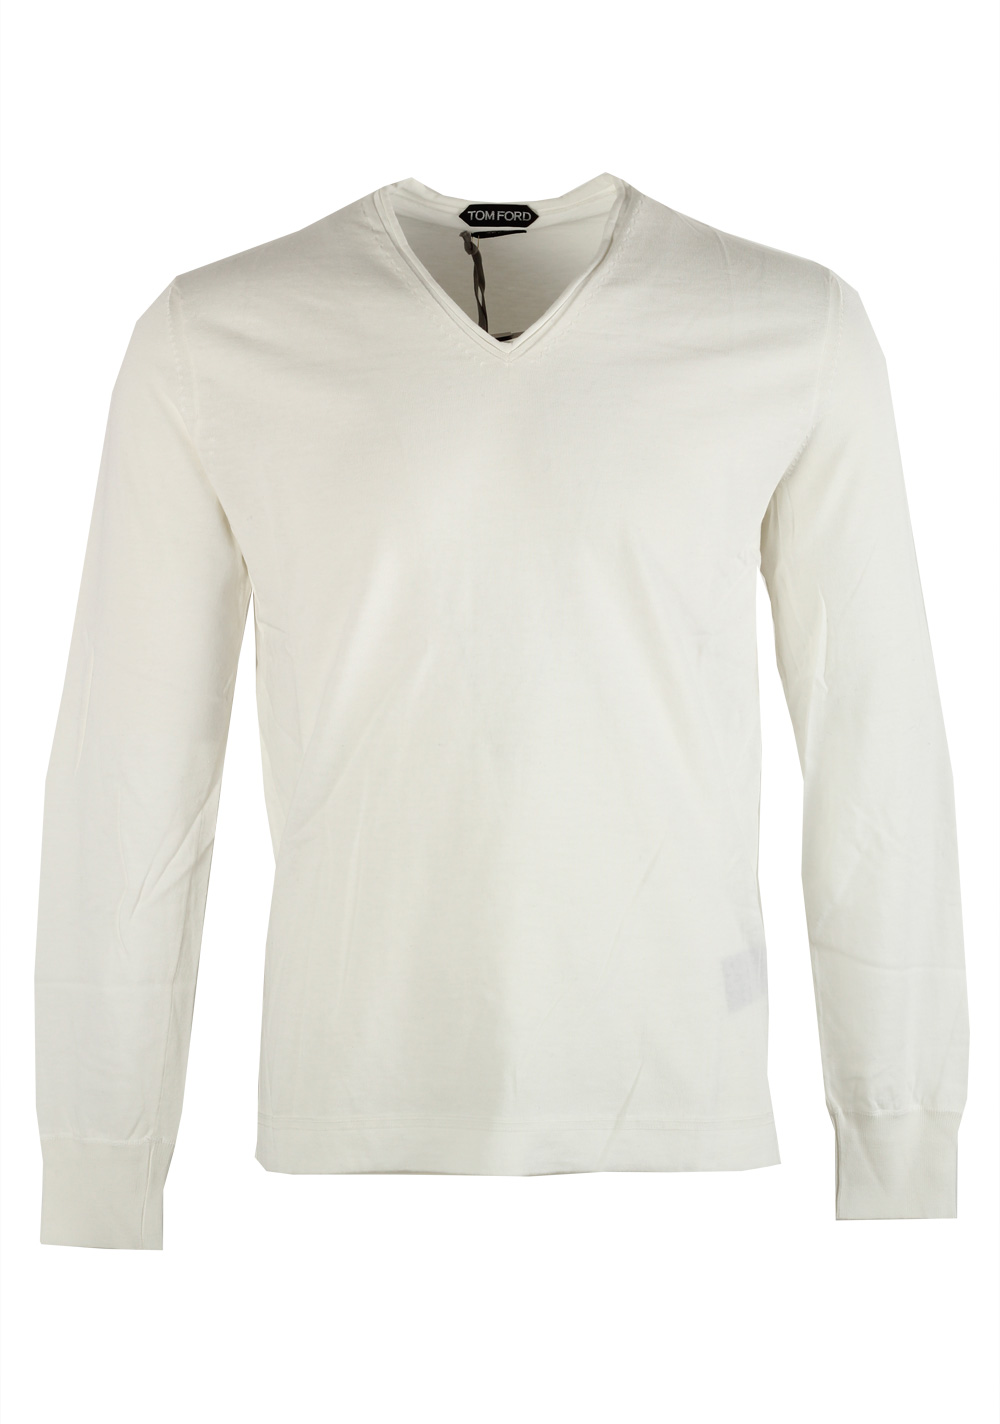 TOM FORD White Long Sleeve V Neck Shirt Size 48 / 38R U.S. In Cotton ...